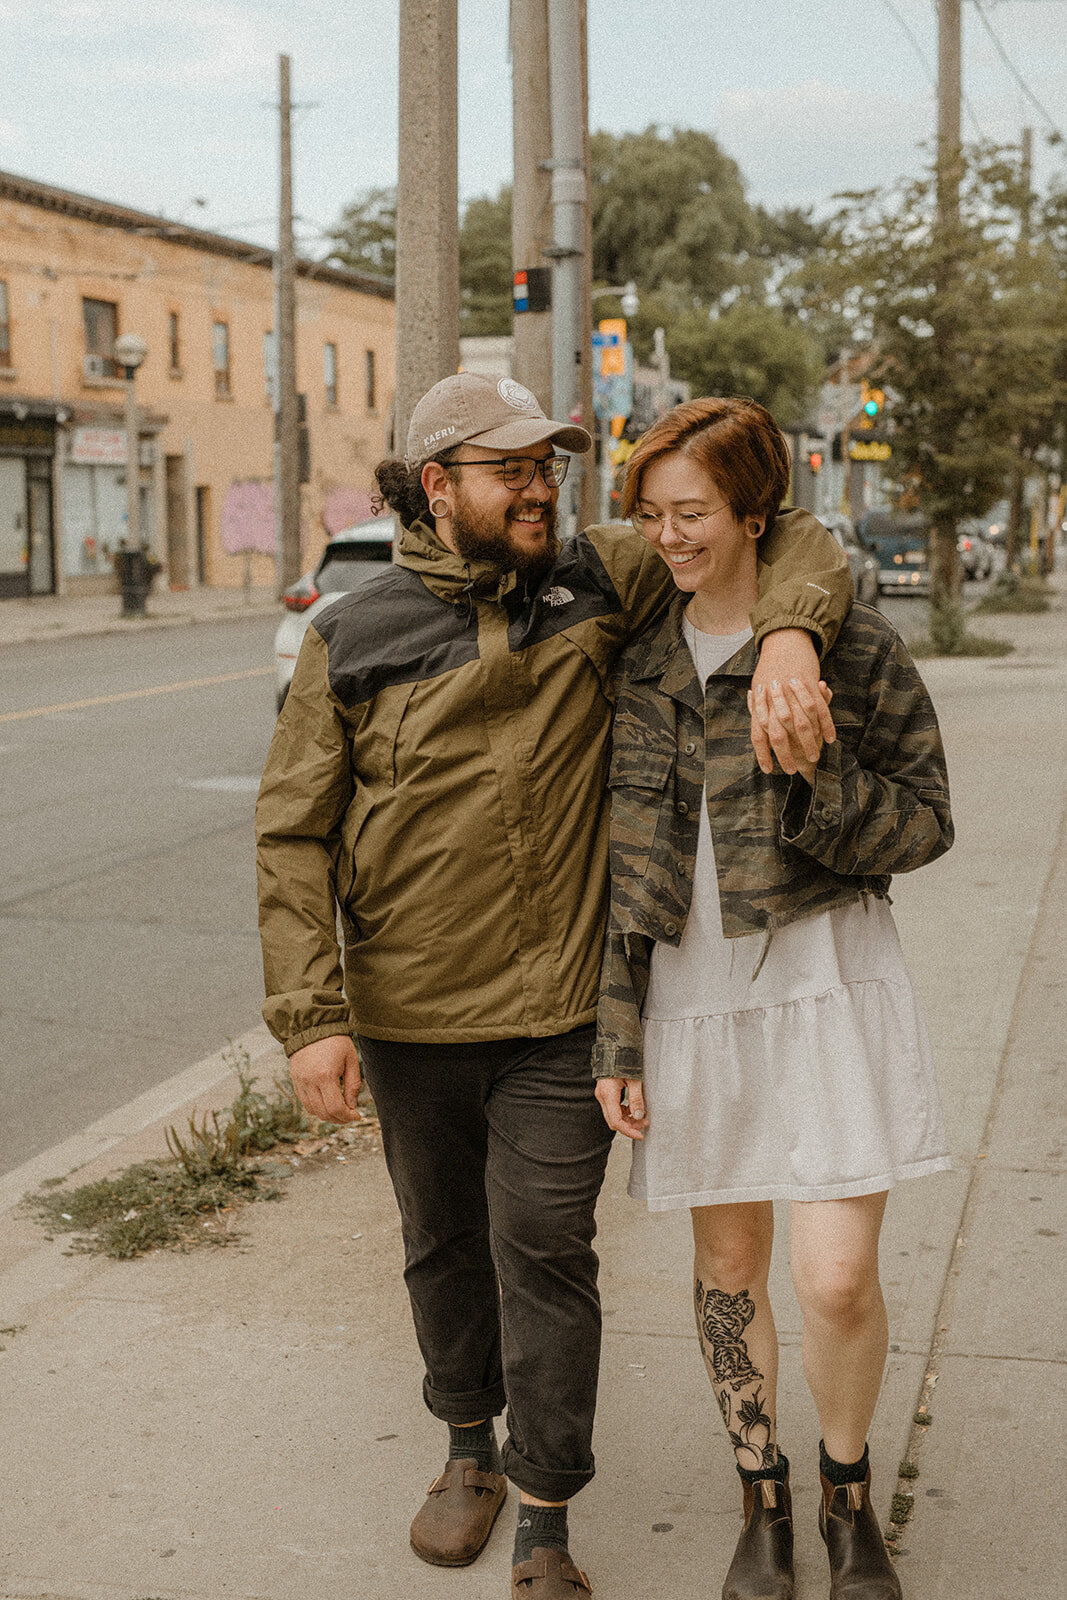 downtown-toronto-engagement-session-at-home-street-photography-romantic-artsy-edgy-wes-anderson-marry-me-52